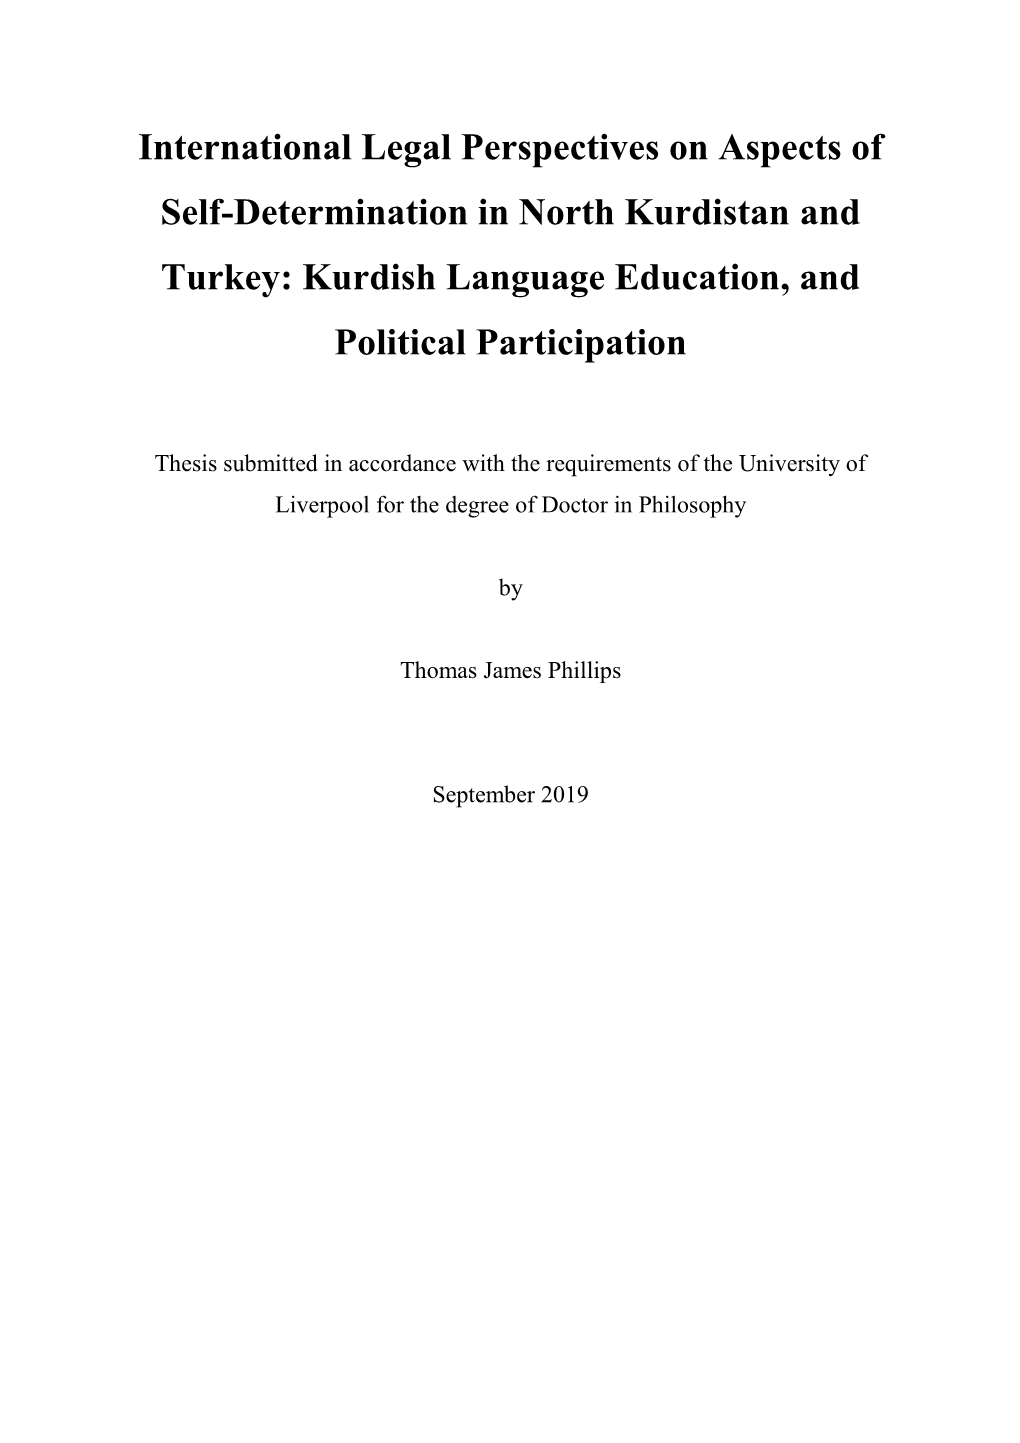 International Legal Perspectives on Aspects of Self-Determination in North Kurdistan and Turkey: Kurdish Language Education, and Political Participation